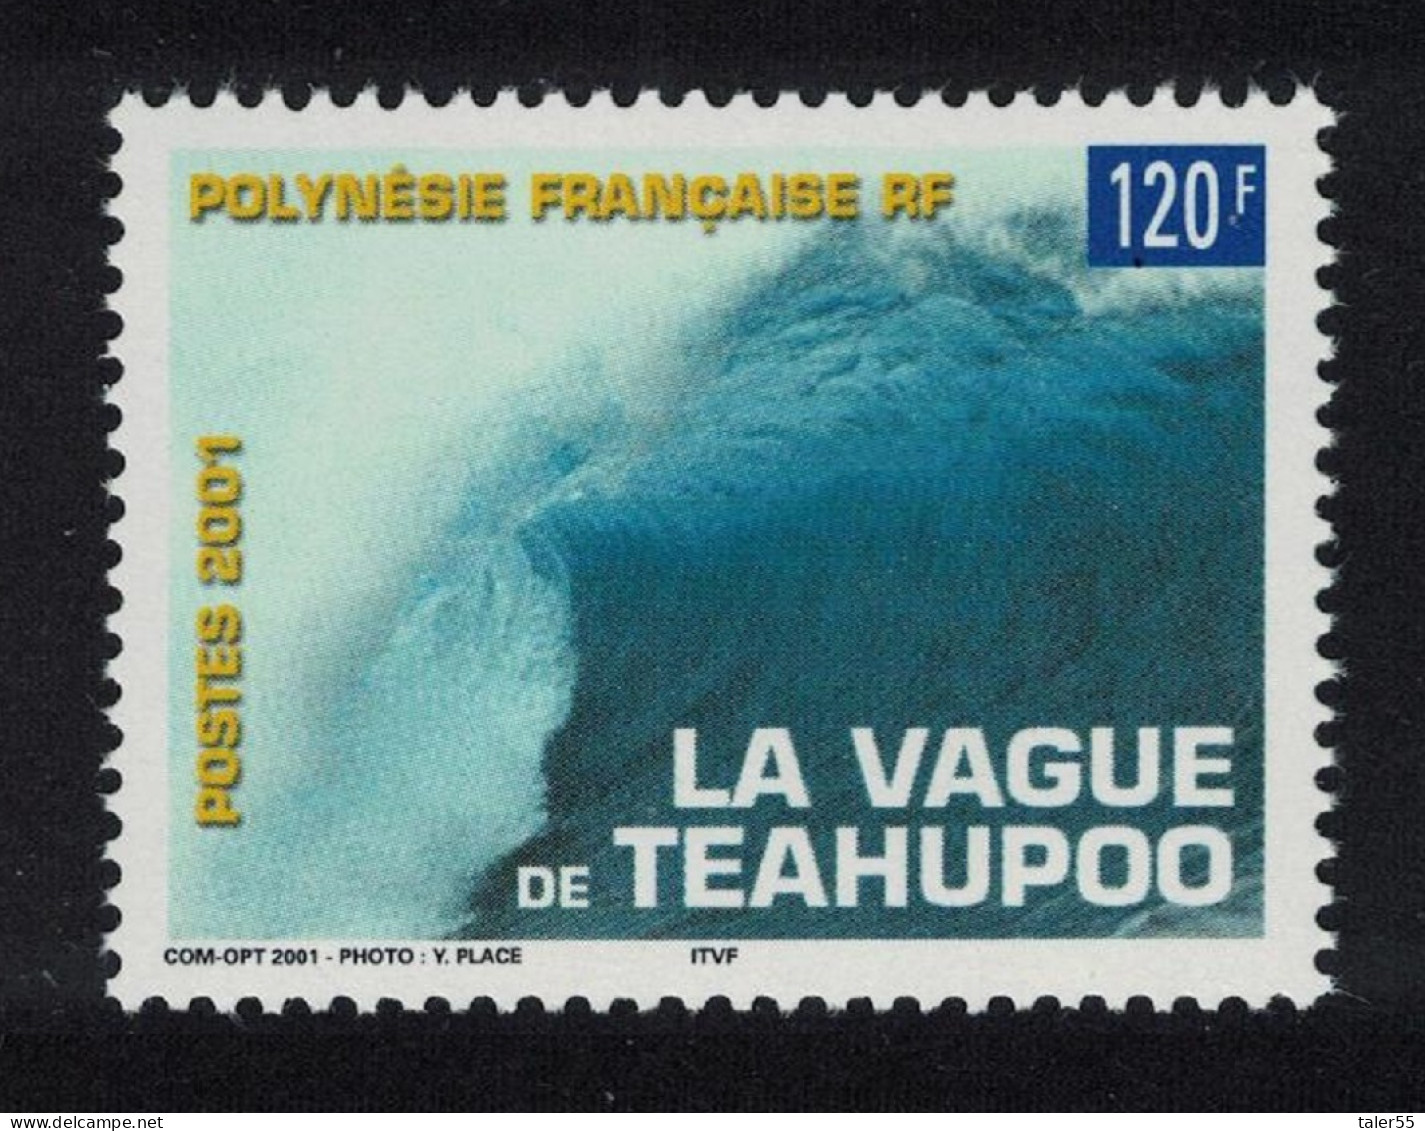 Fr. Polynesia Surfing The Heaviest Wave In The World Teahupoo 2001 MNH SG#907 - Unused Stamps